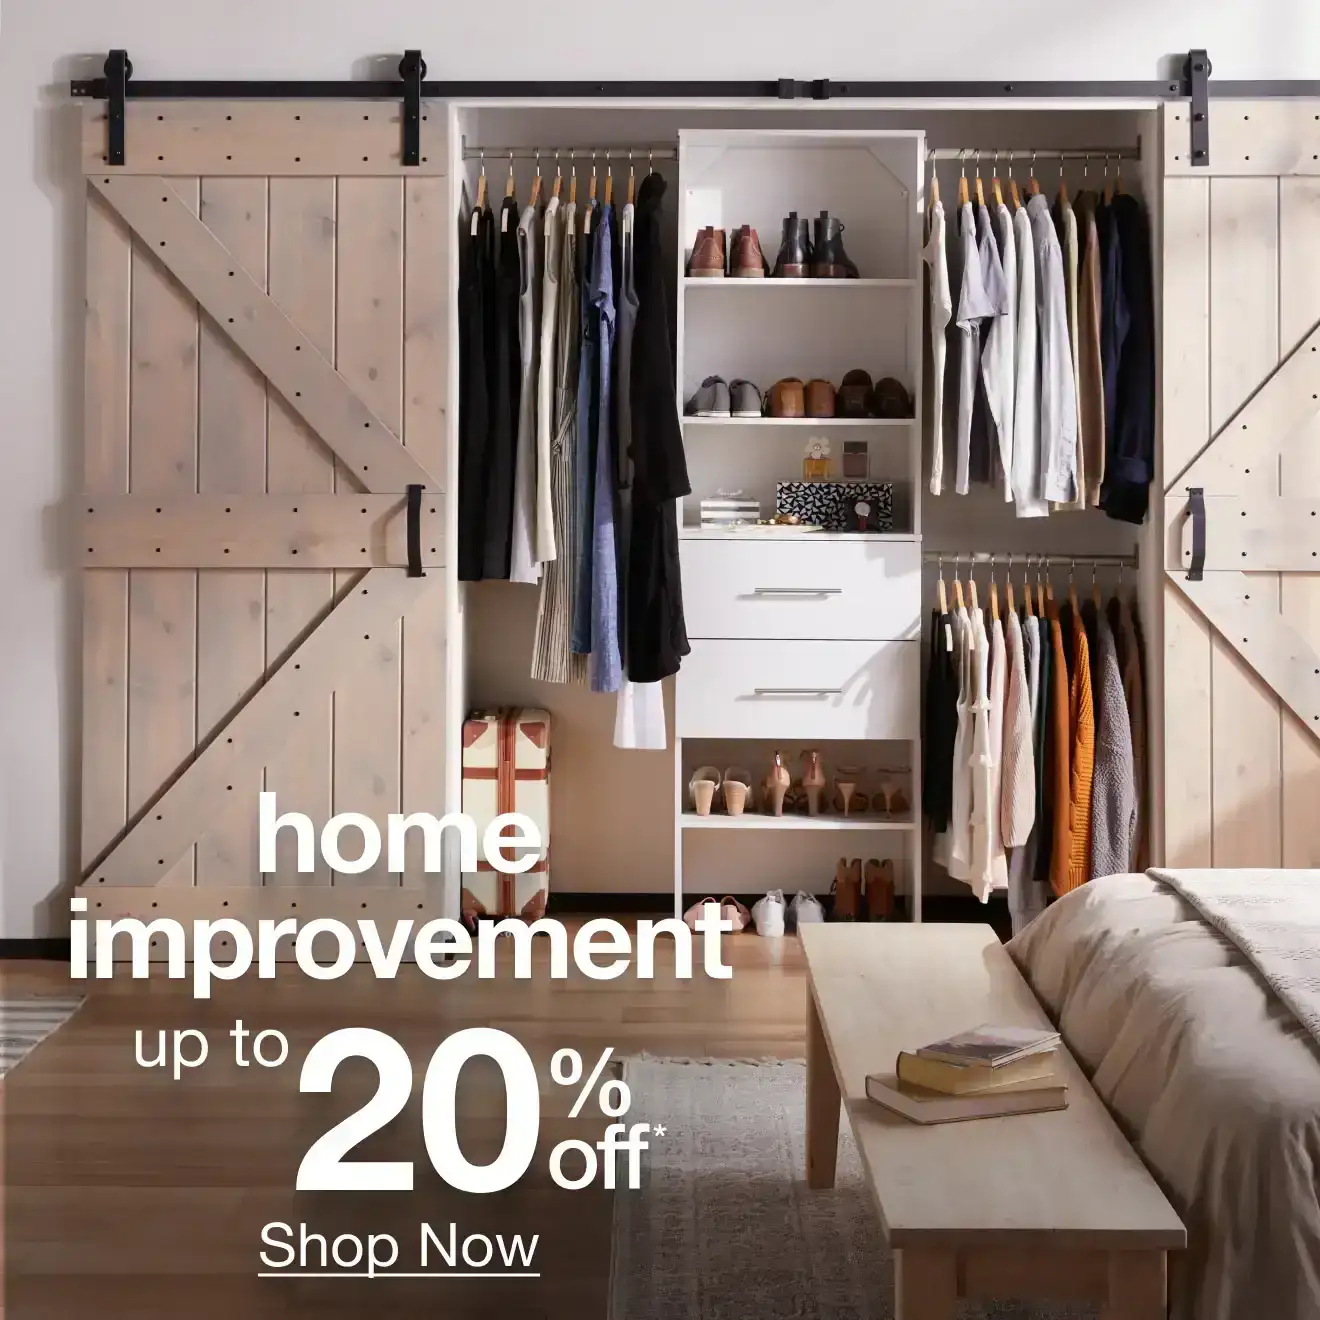 Home Improvement Up to 20% Off